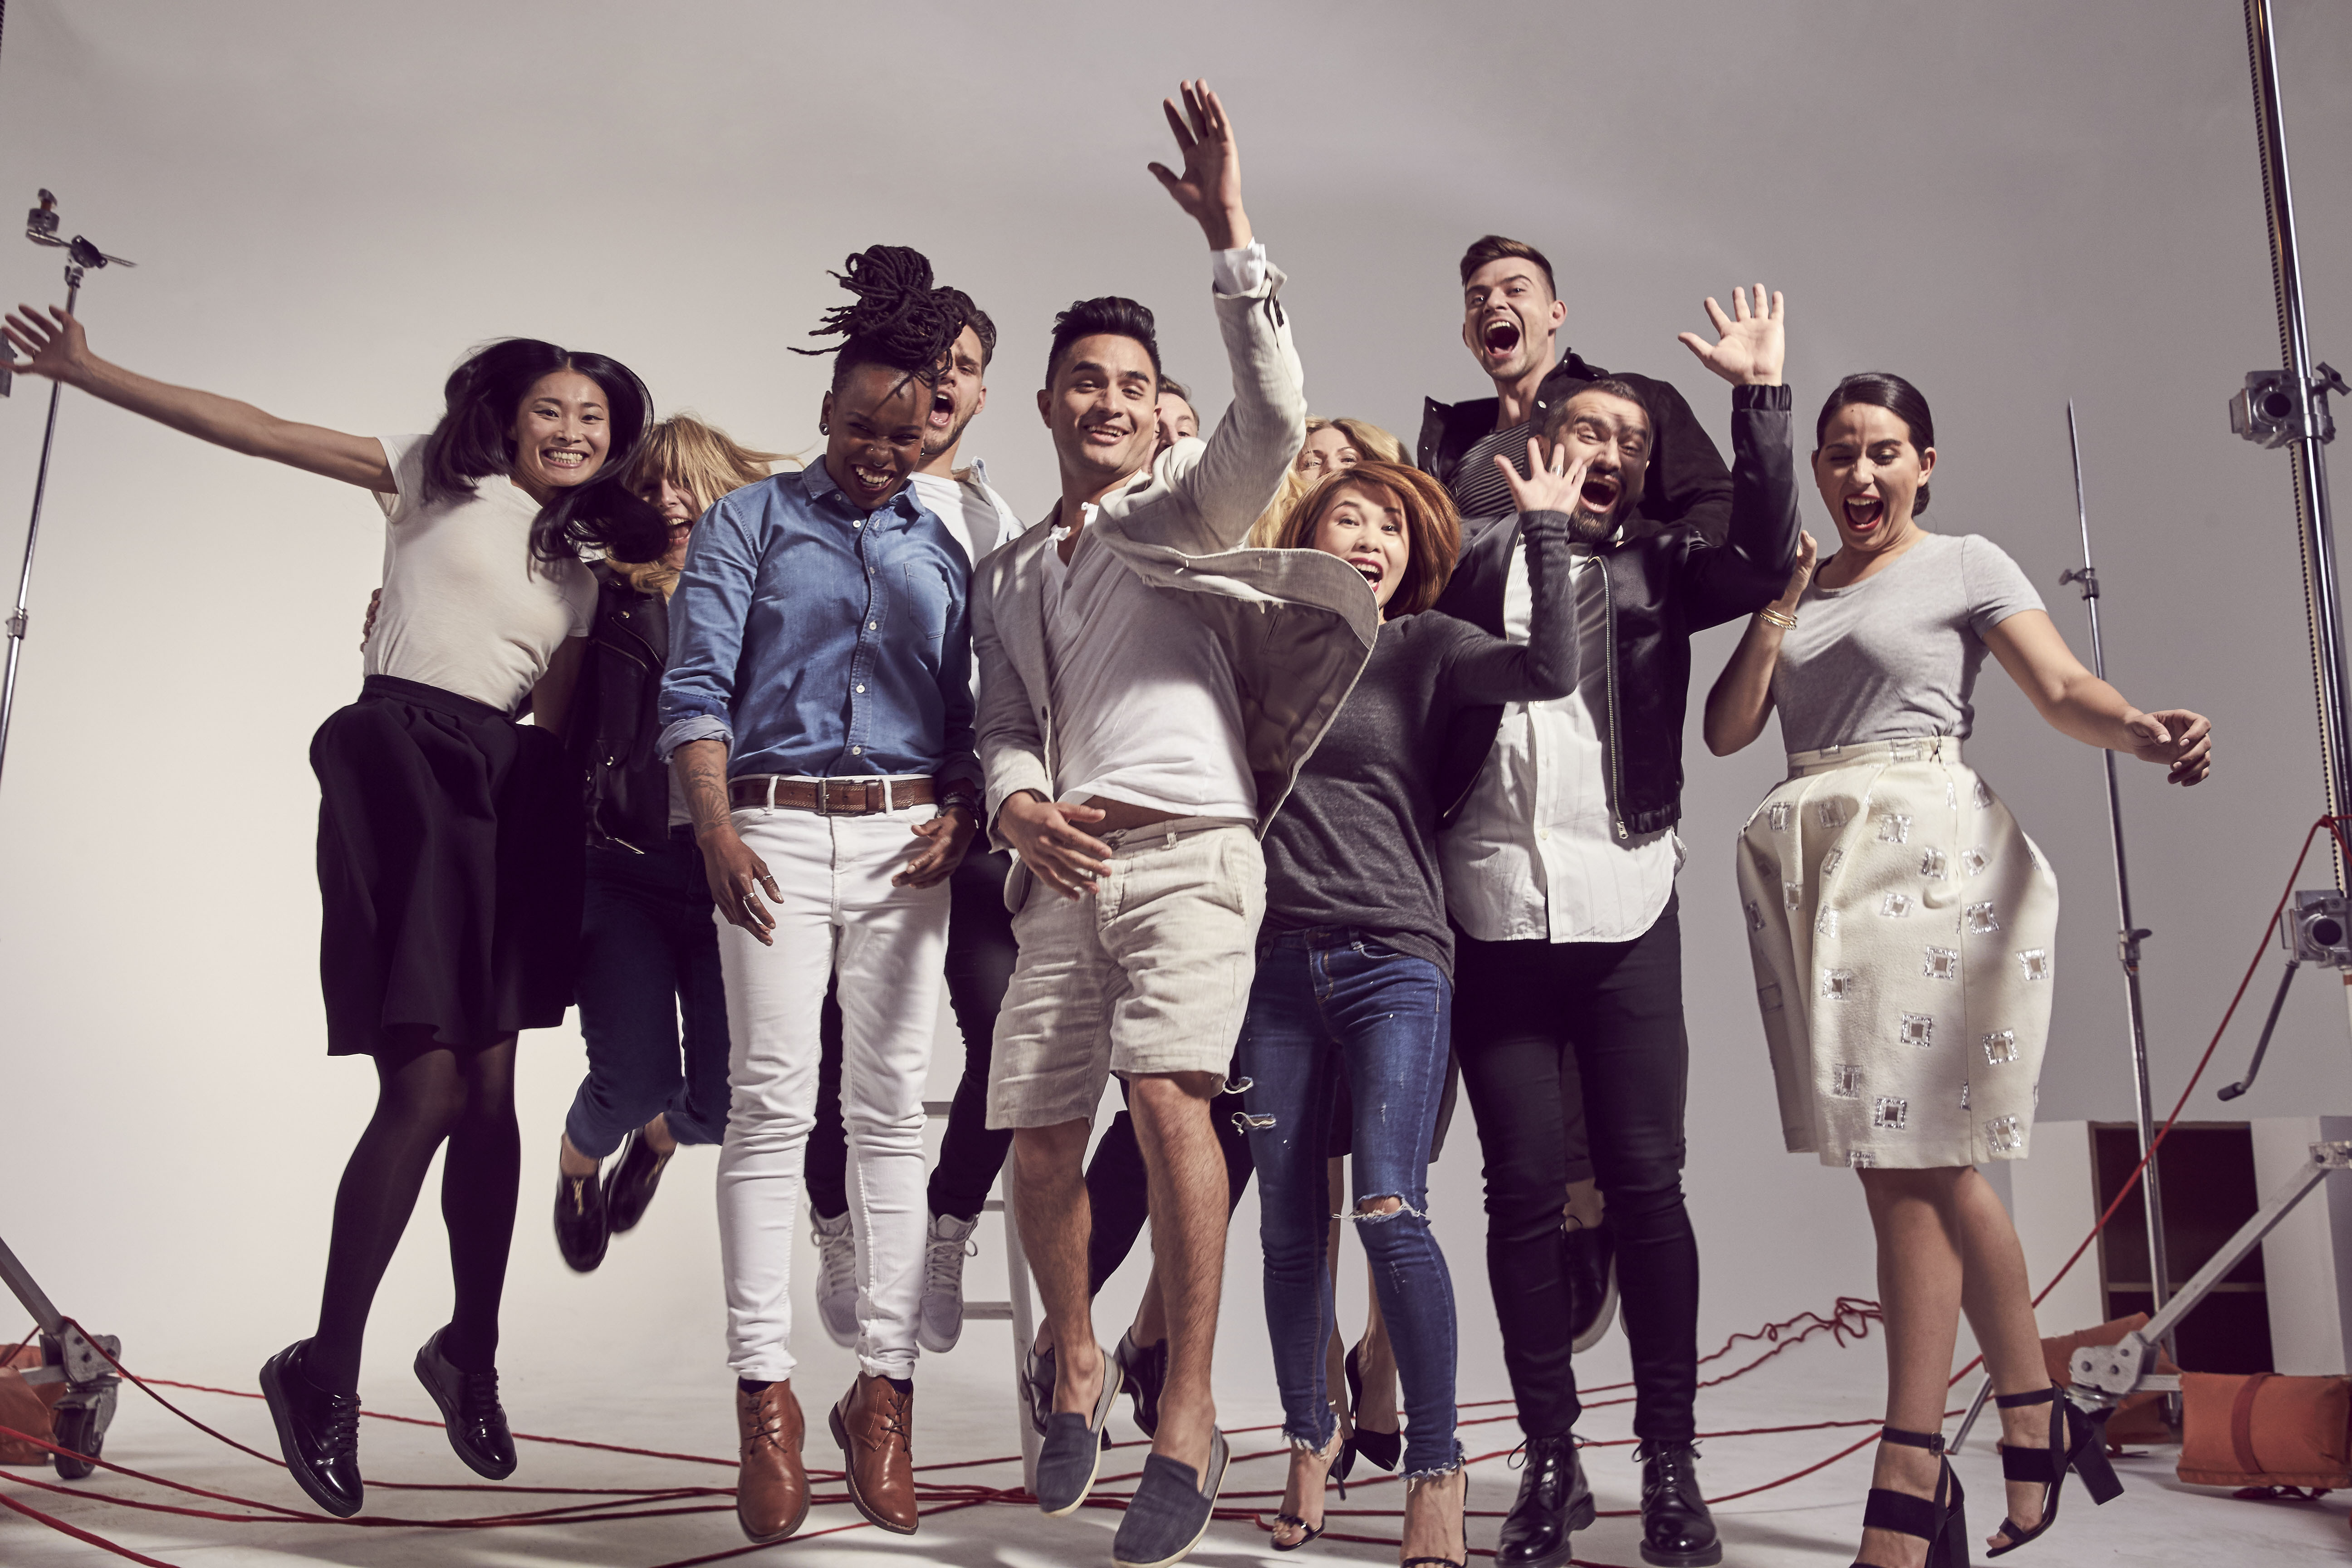 H&M Named as a Top Global Employer by the Business of Fashion